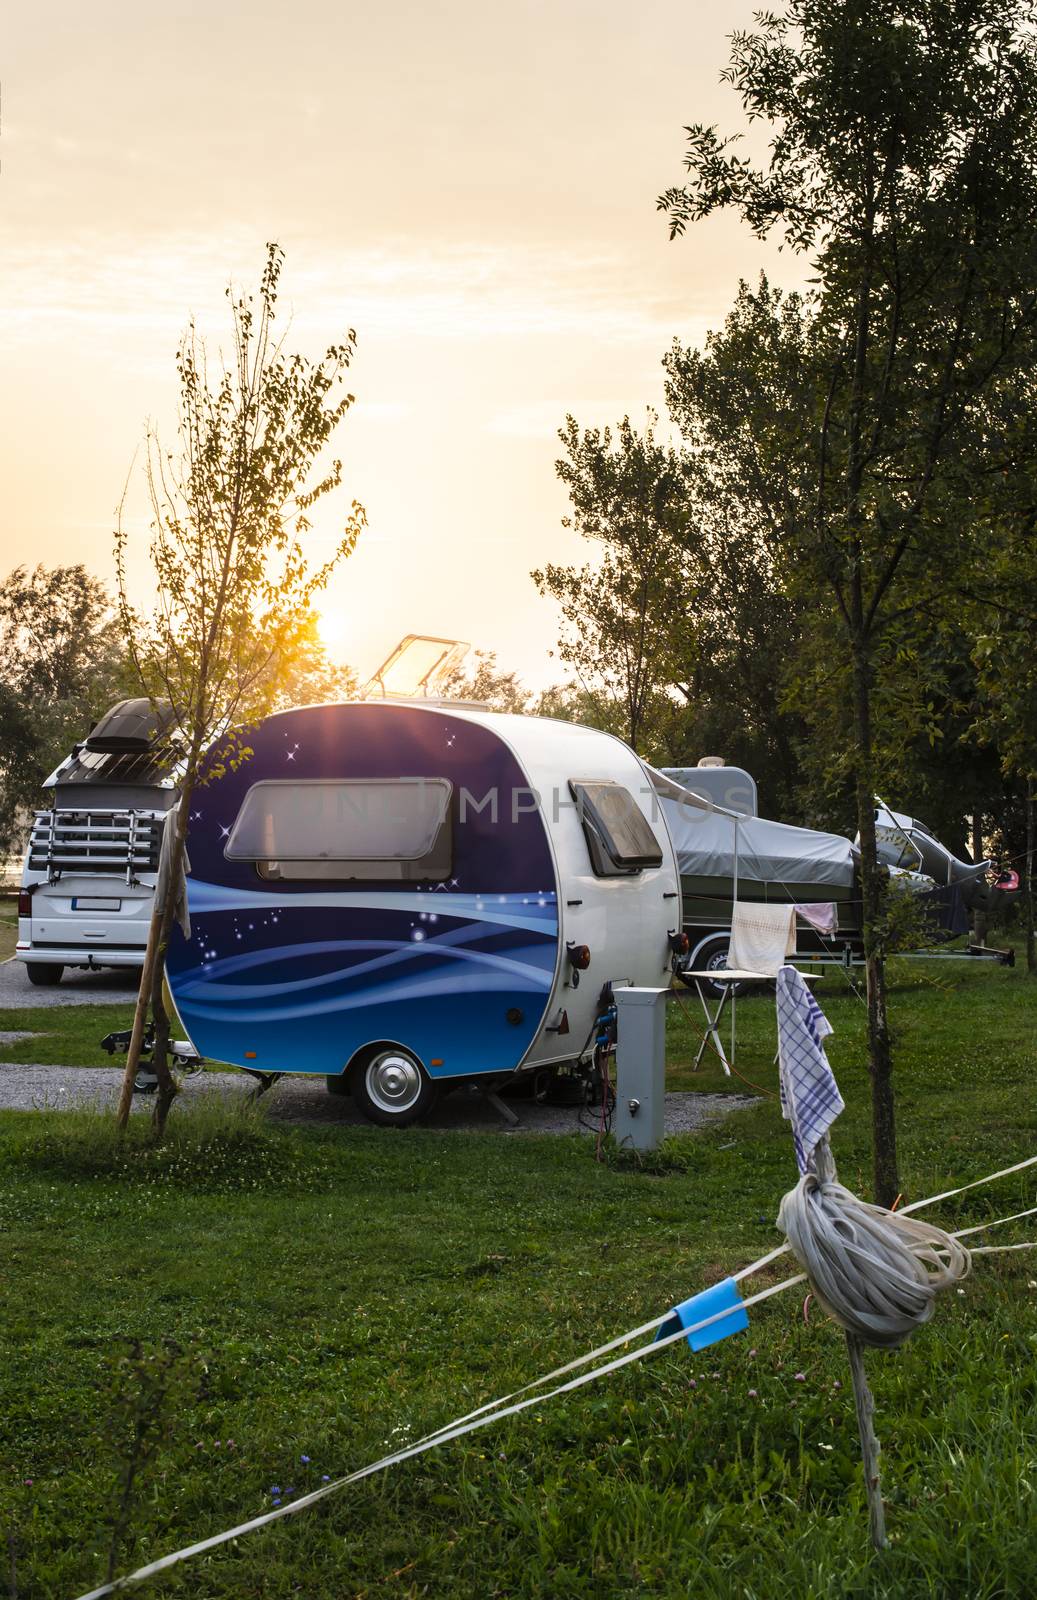 Caravans and campers on green meadow in campsite. Sunrise, rays on campers in the morning. Green grass. Outdoor concept for traveling and res in the nature.